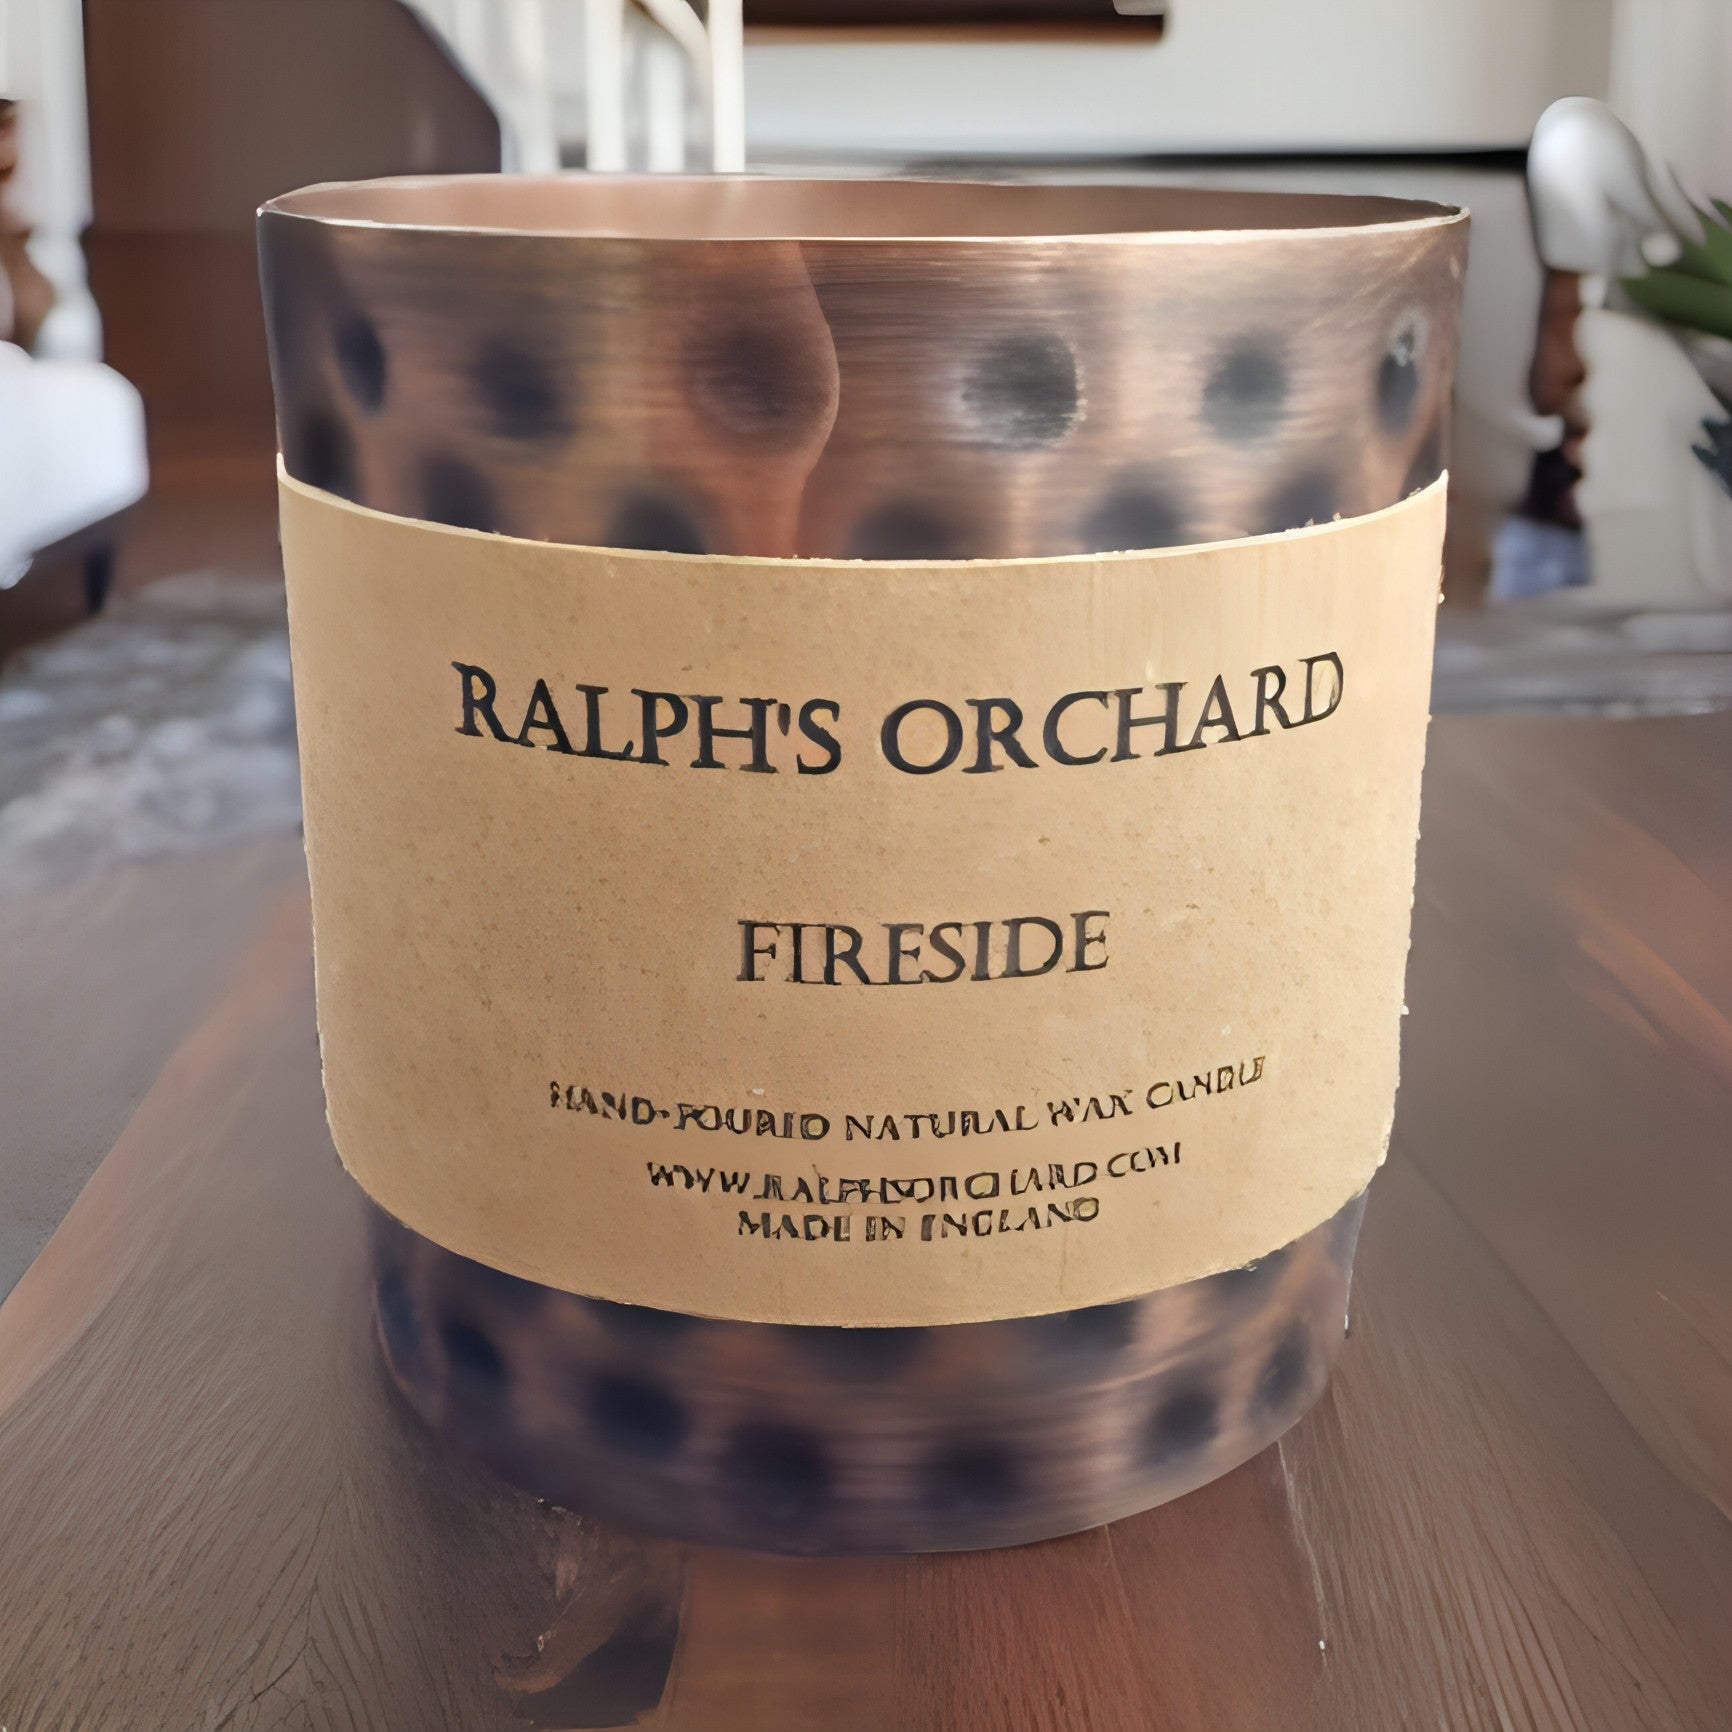 Fireside scented candle